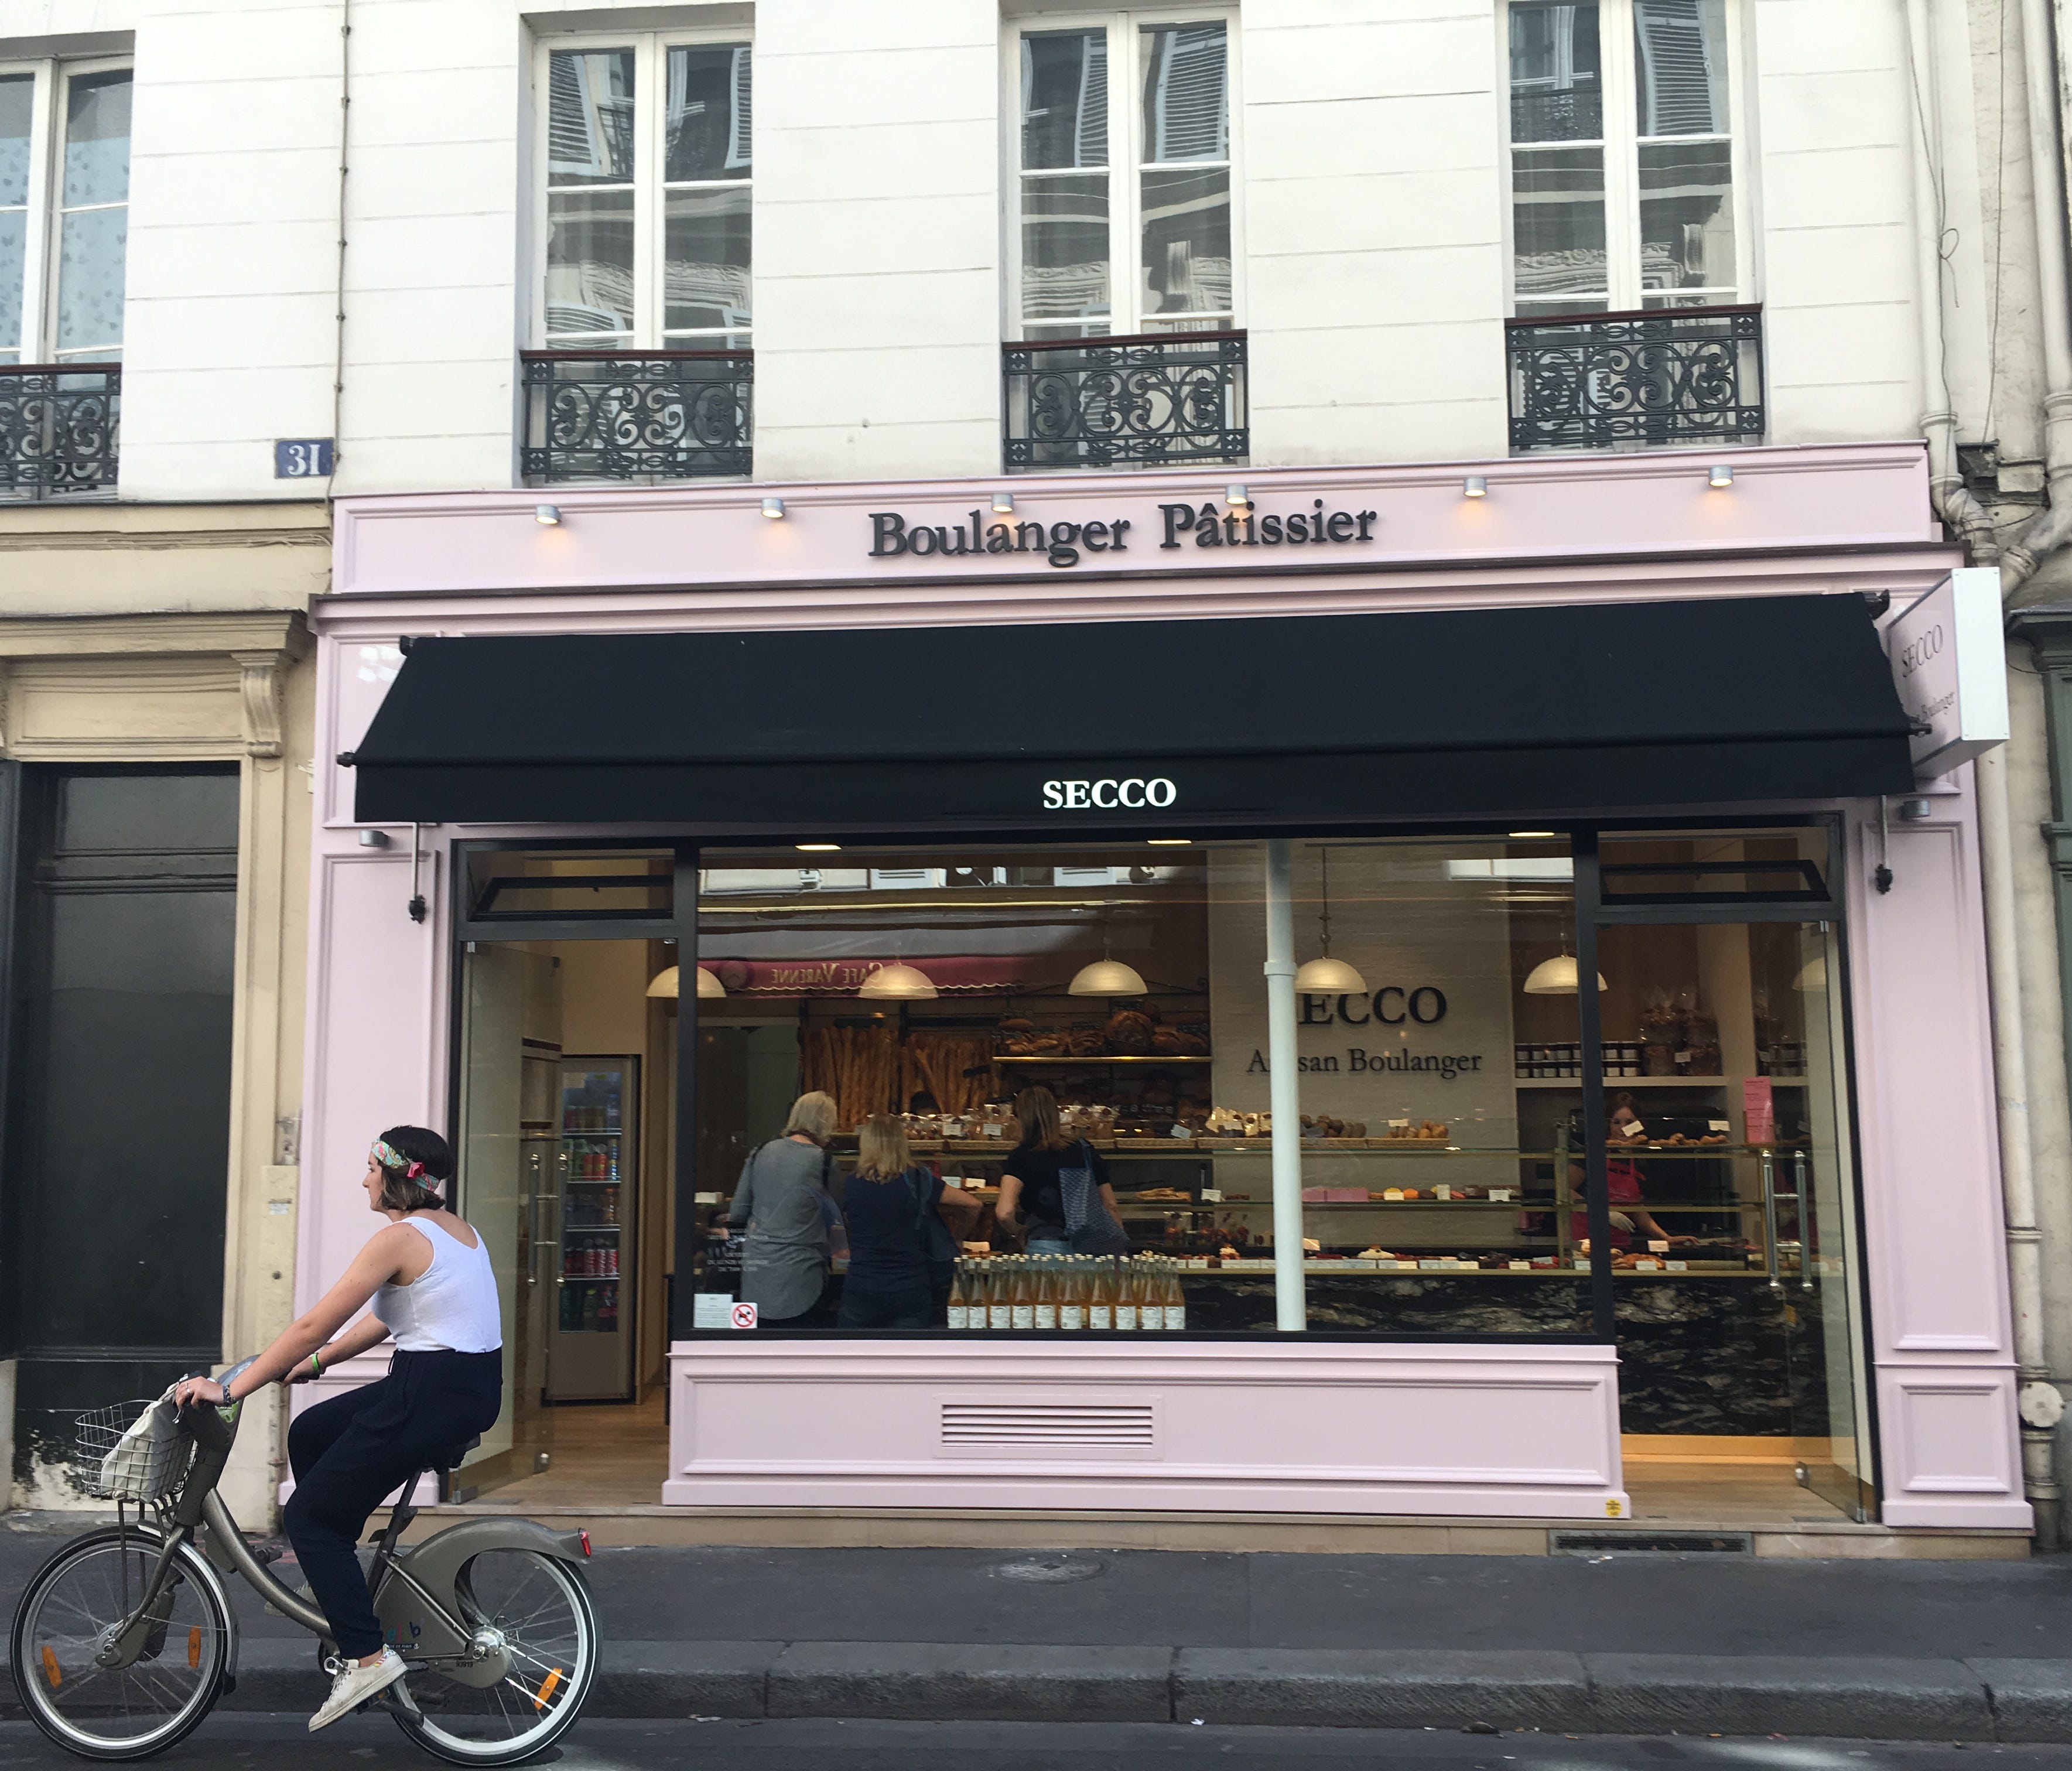 Star boulanger Stéphane Secco has worked for more than 15 years in the French capital, specializing in simple, authentic products of the highest quality. At the rue de Varenne address (just off the Rue du Bac), try the brioche, financiers and traditi